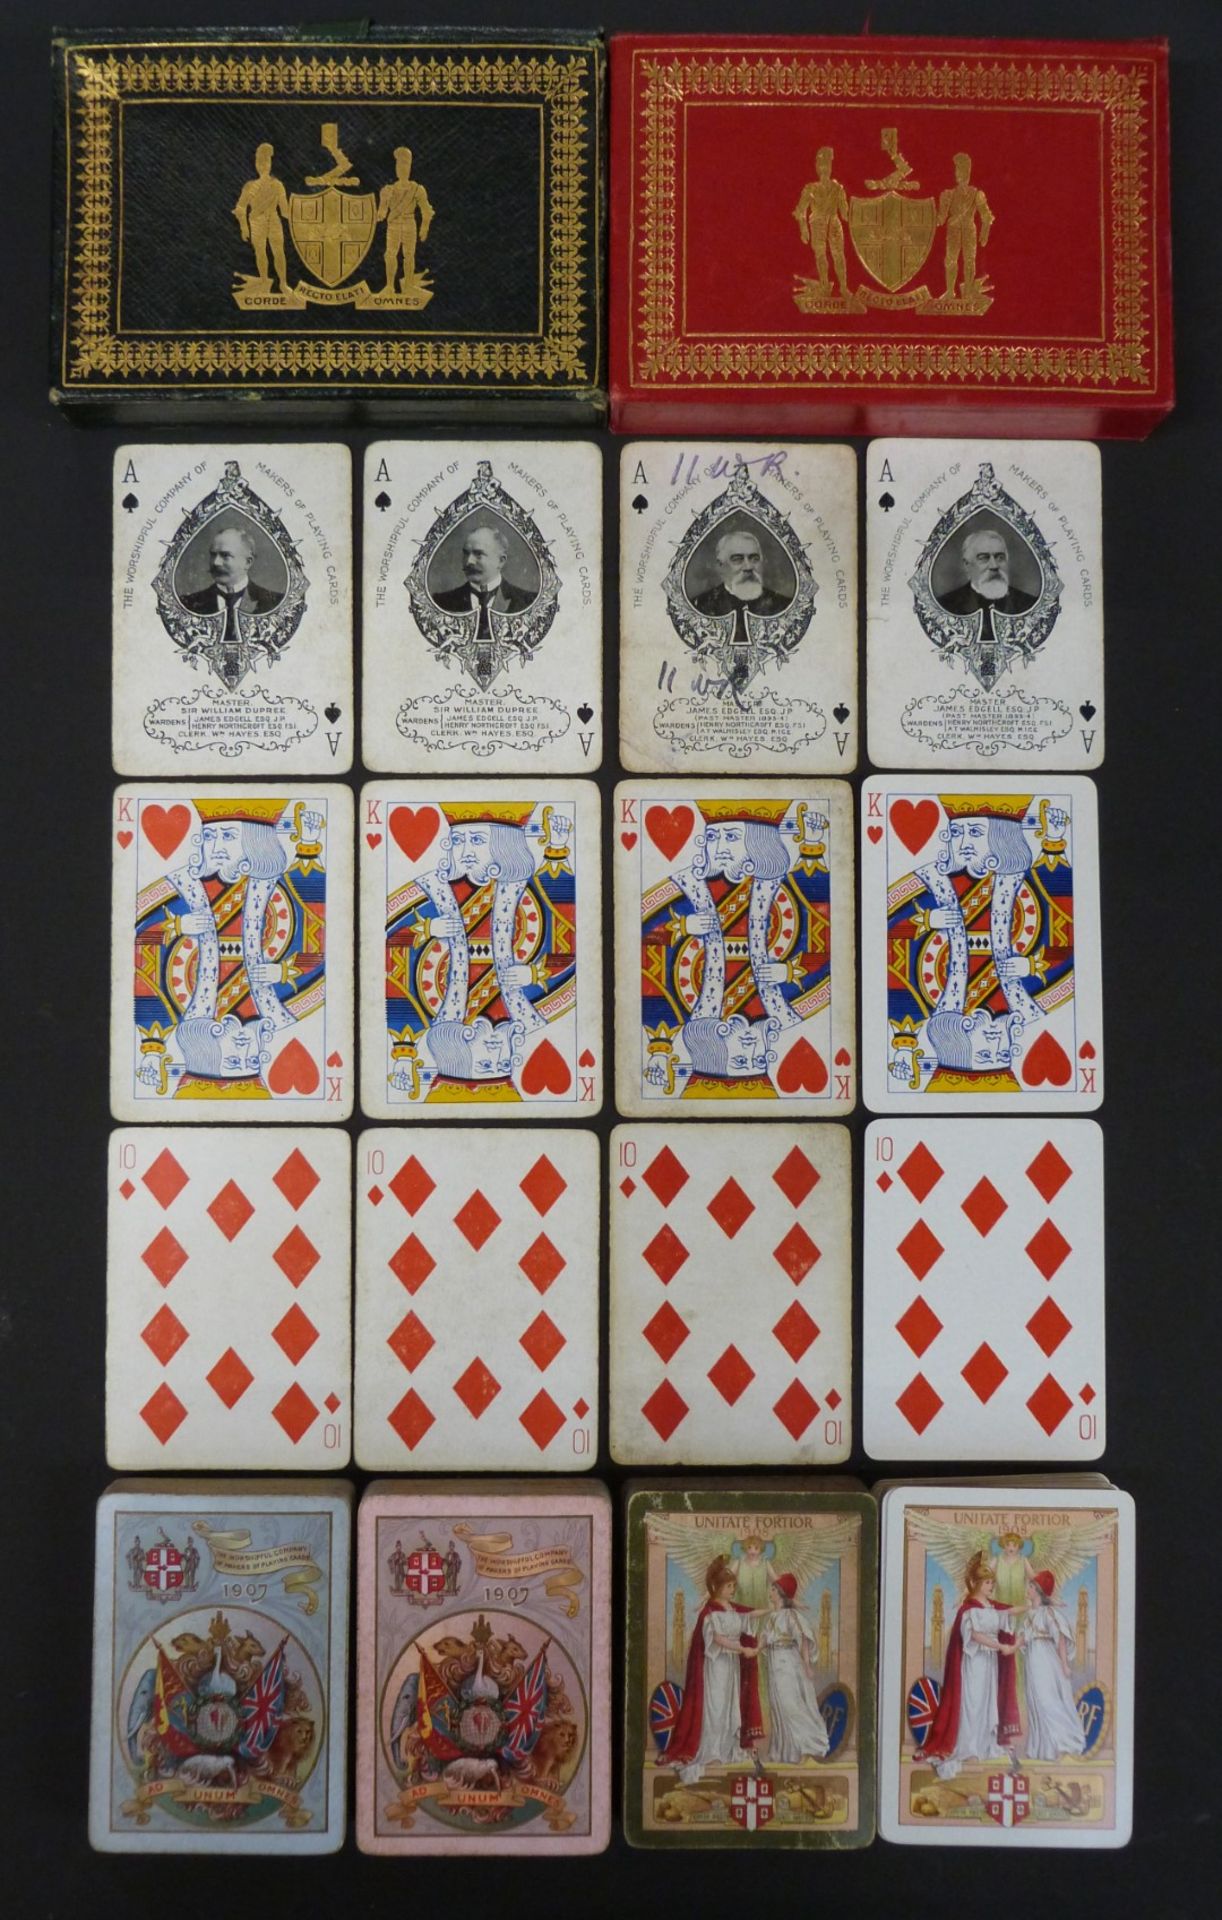 Four packs of Worshipful Company of Makers of Playing Cards playing cards, comprising two double